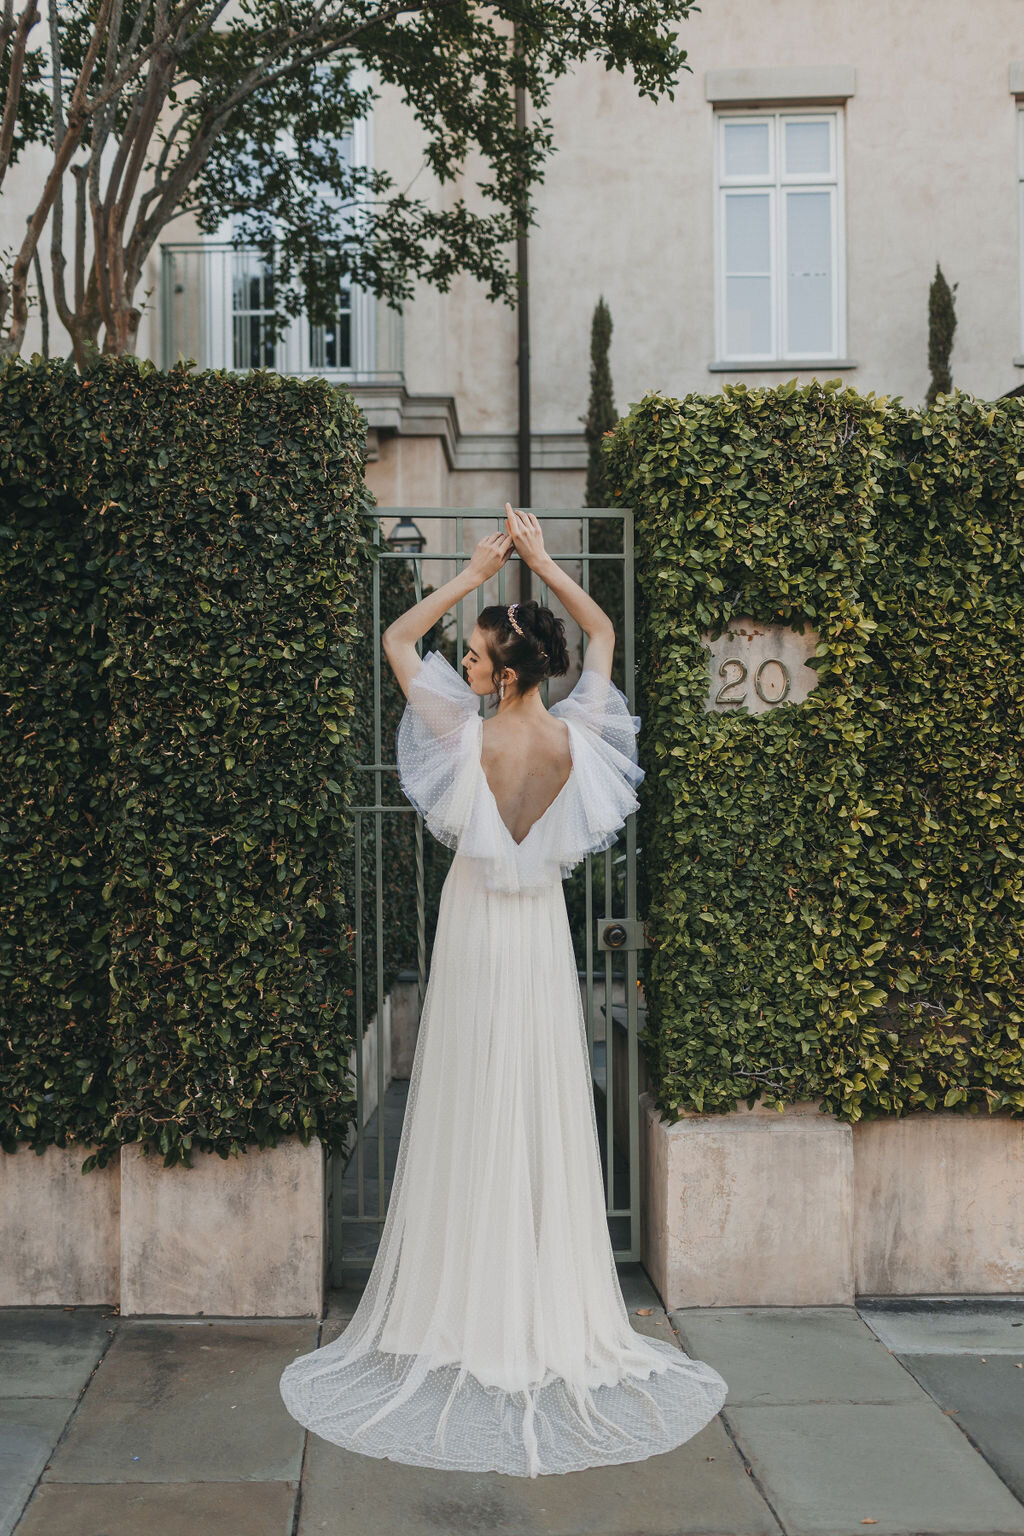 The Mai bridal style is modeled in front of a greenery wall on the Charleston peninsula. the model stands with her back to the camera and her arms above her head, which fans out the flutter sleeves into wings.